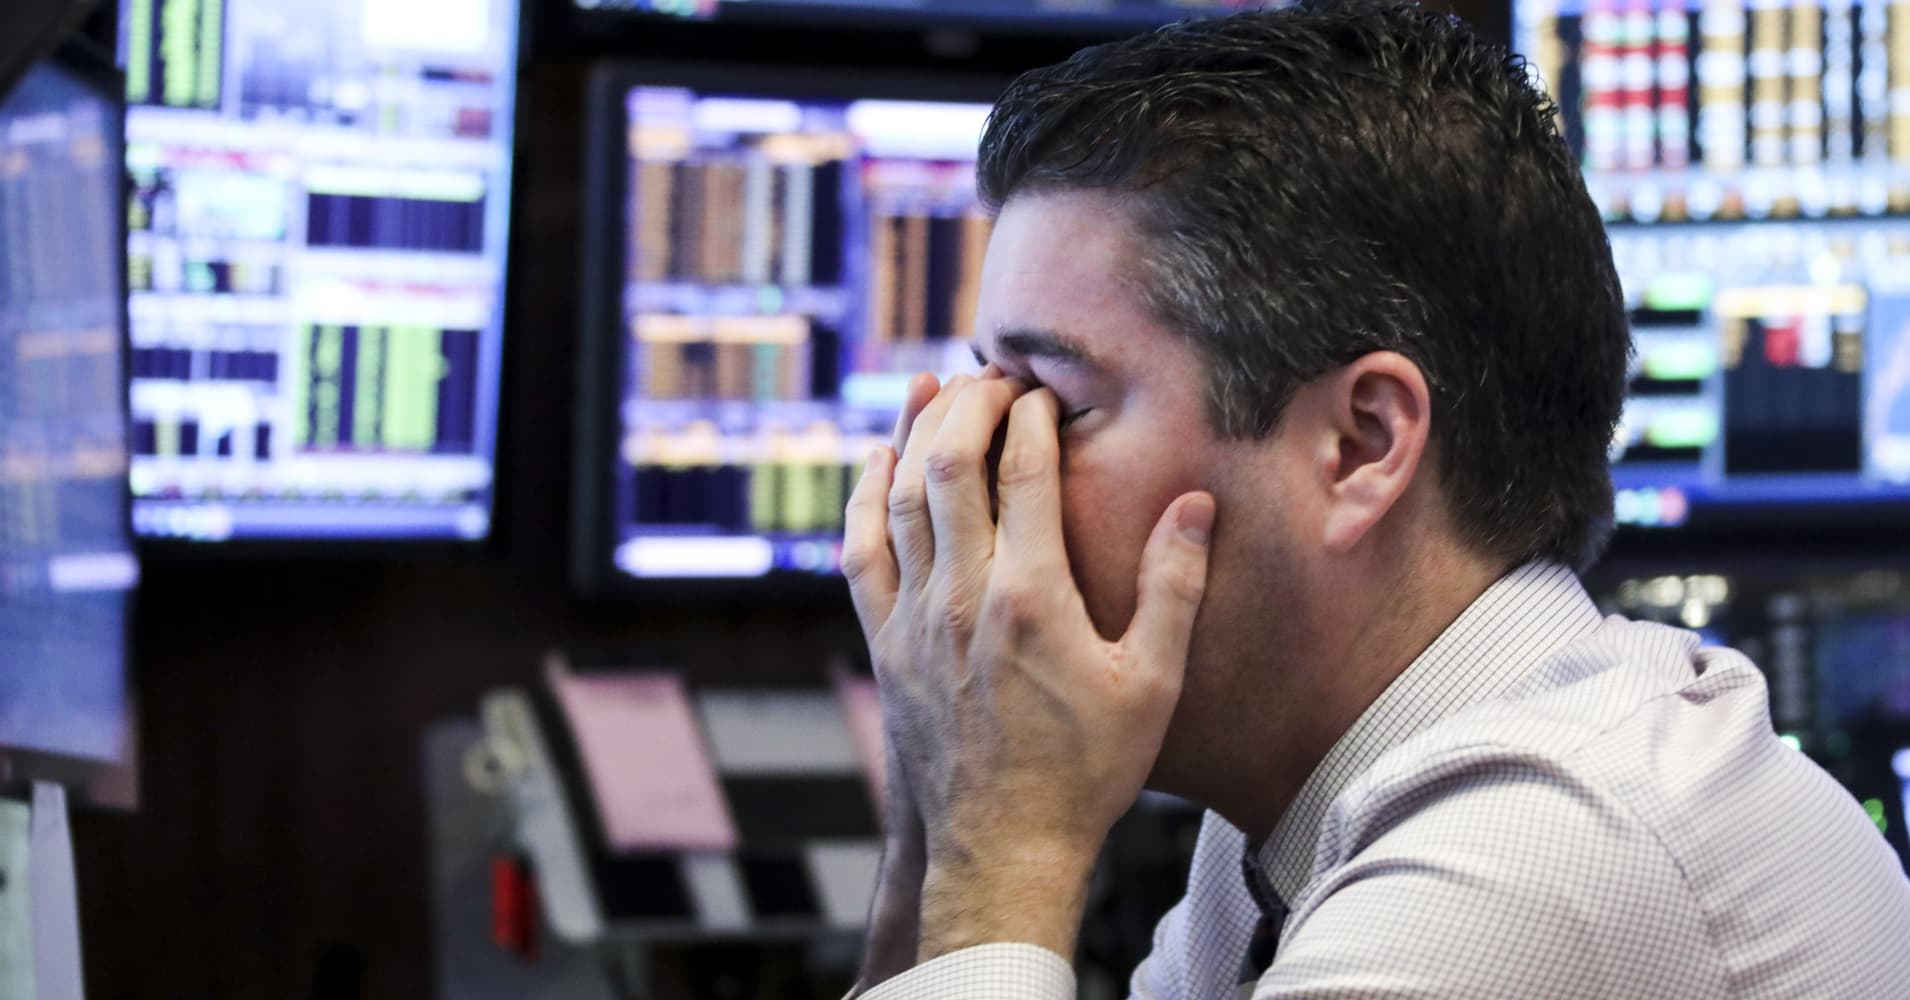 Wall Street will likely see worst earnings season in about three years, Nick Colas warns